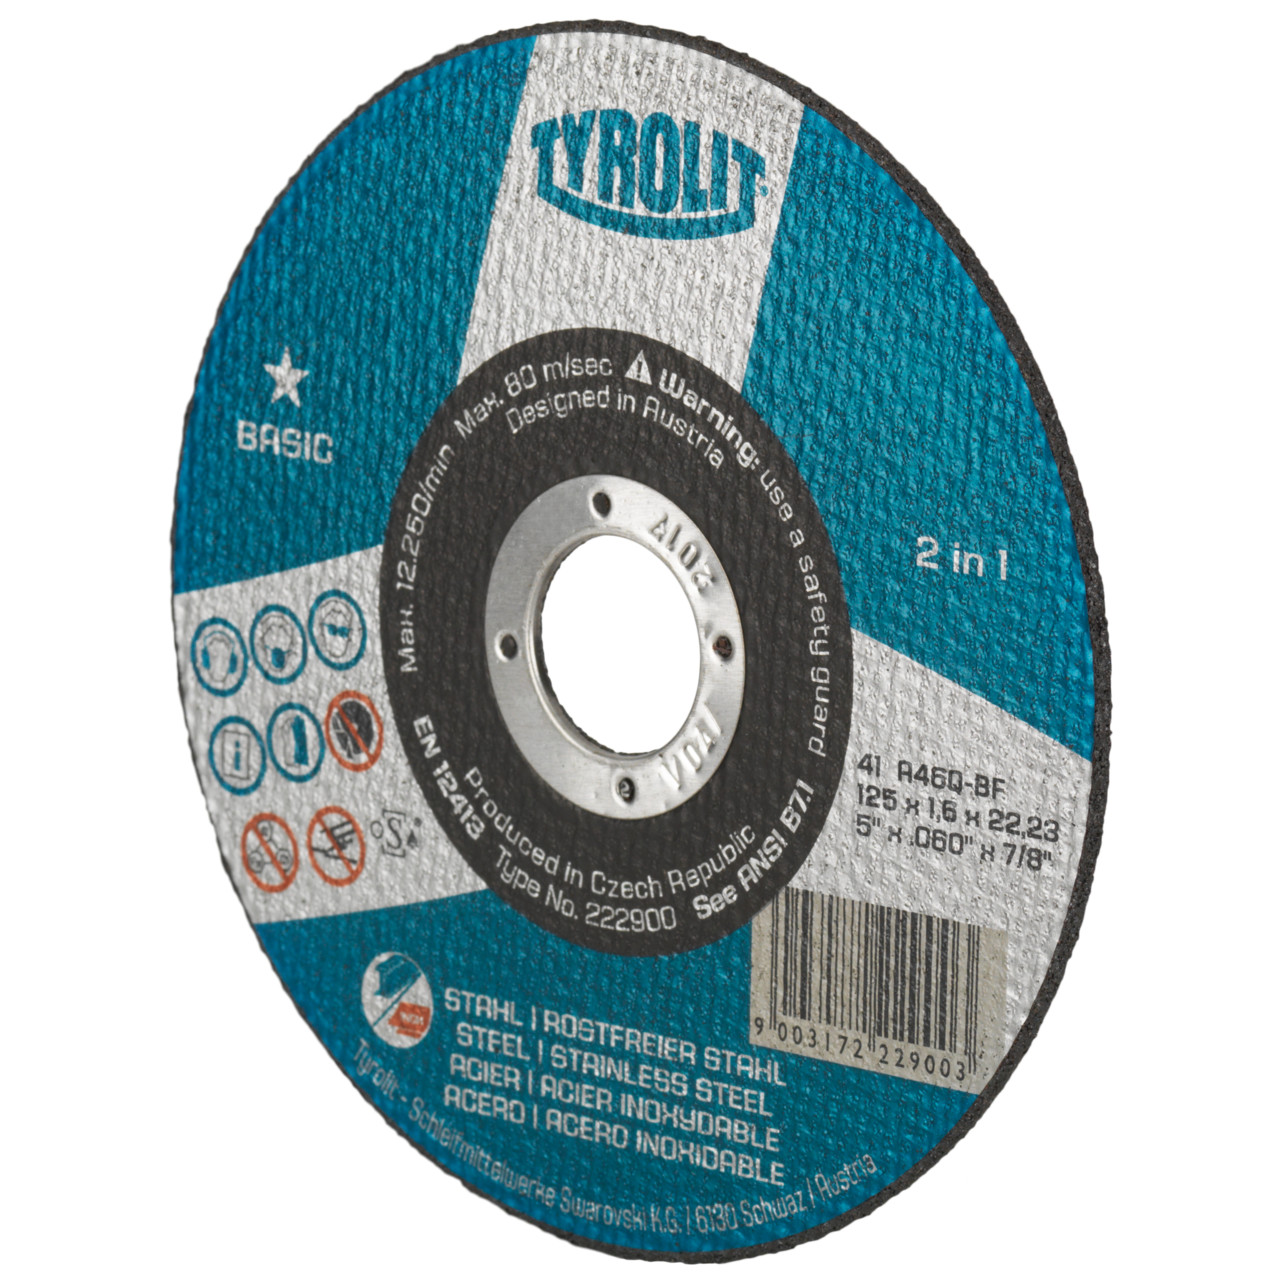 TYROLIT cut-off wheels DxDxH 178x2.5x22.23 2in1 for steel and stainless steel, shape: 41 - straight version, Art. 250165